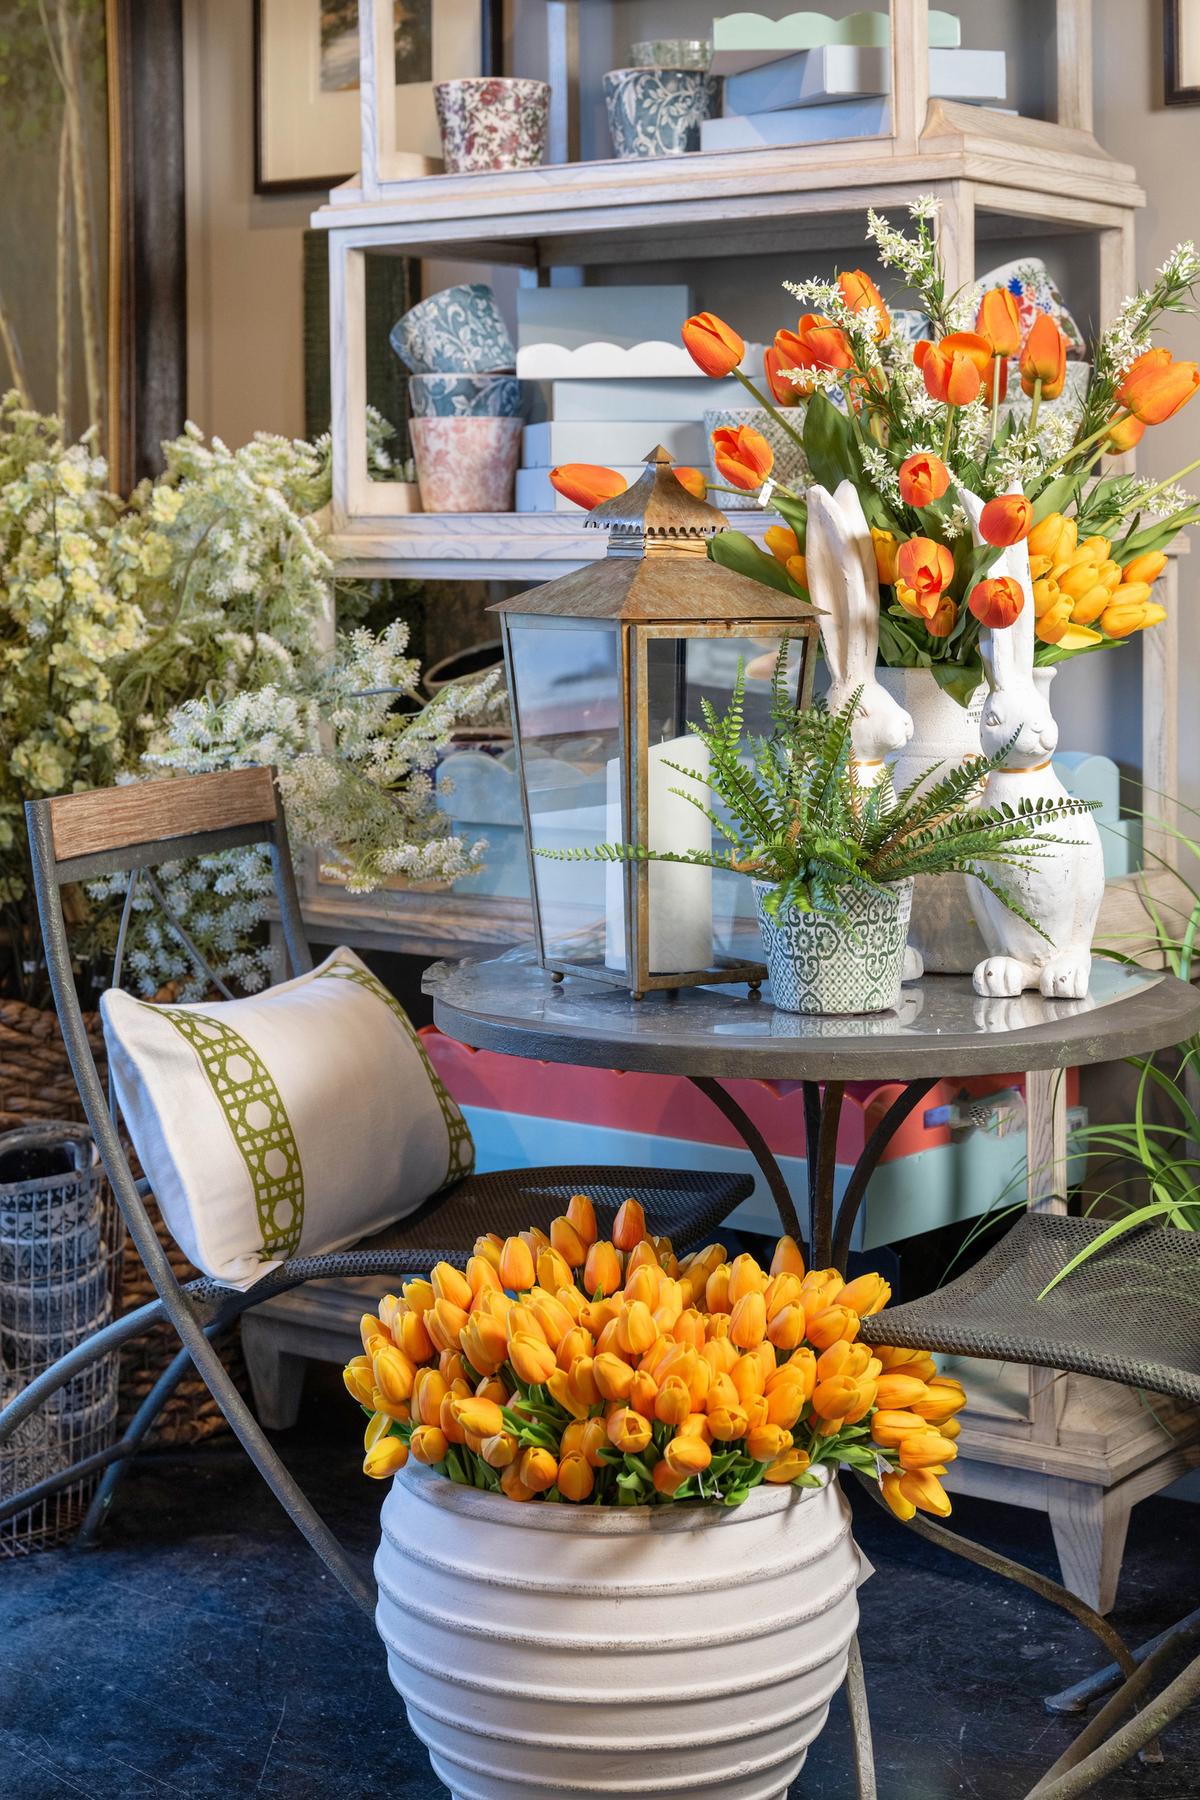 With their simple beauty and versatility, tulips are a must-have for any spring decor. (Handout/TNS)